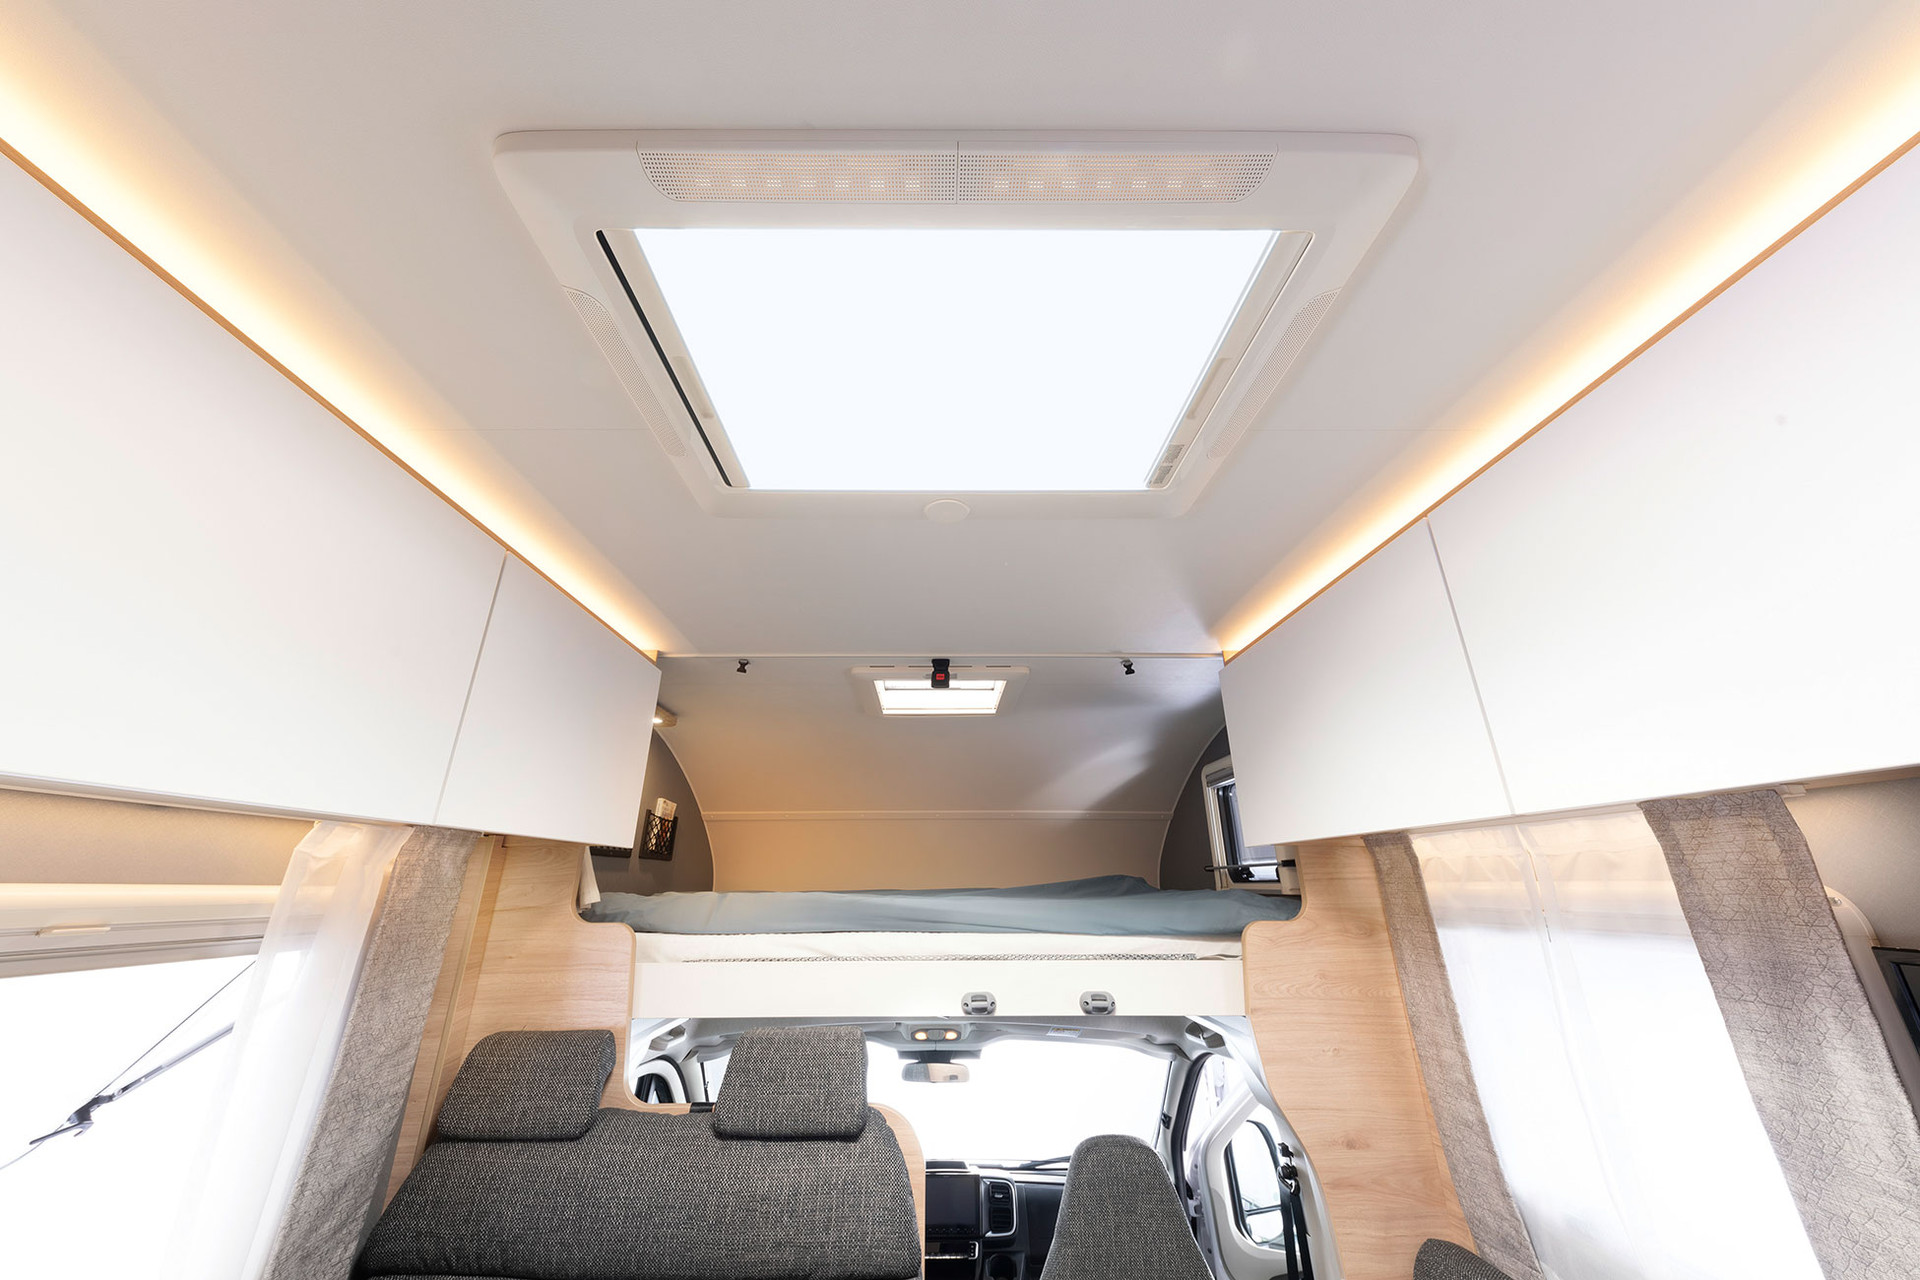 The large panoramic roof window above the seating lounge brings plenty of light and air into the vehicle.